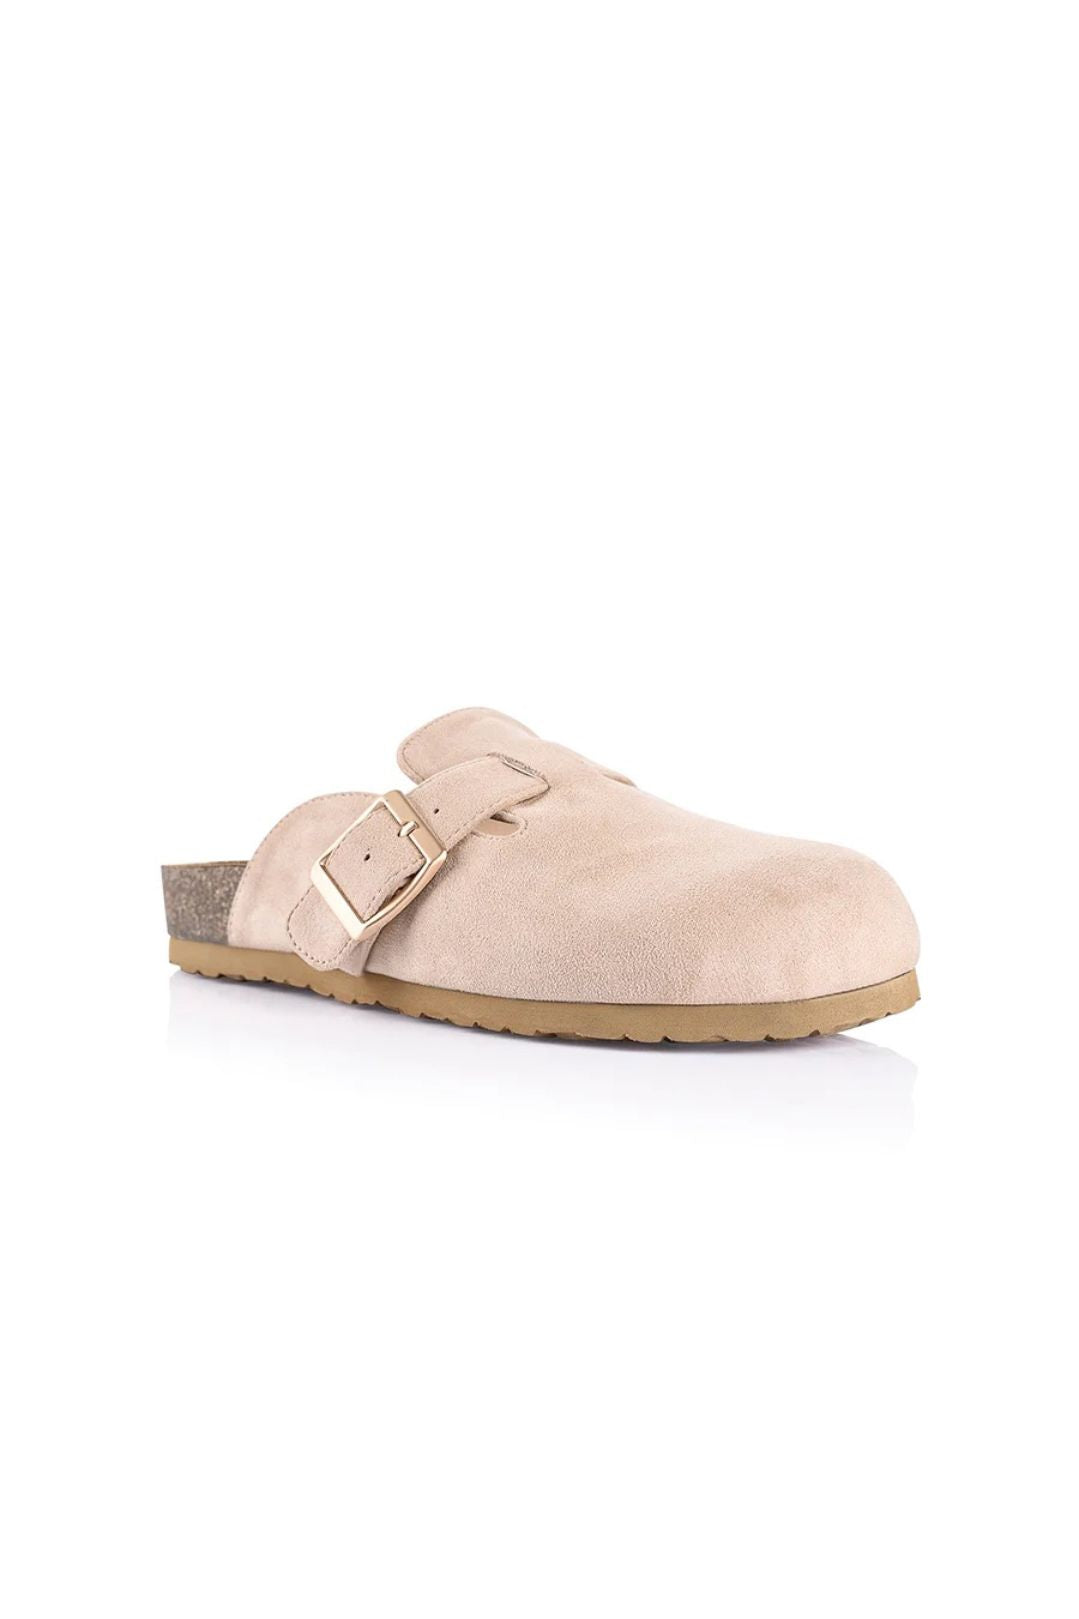 Xion Footbed Slides - Stone Micro